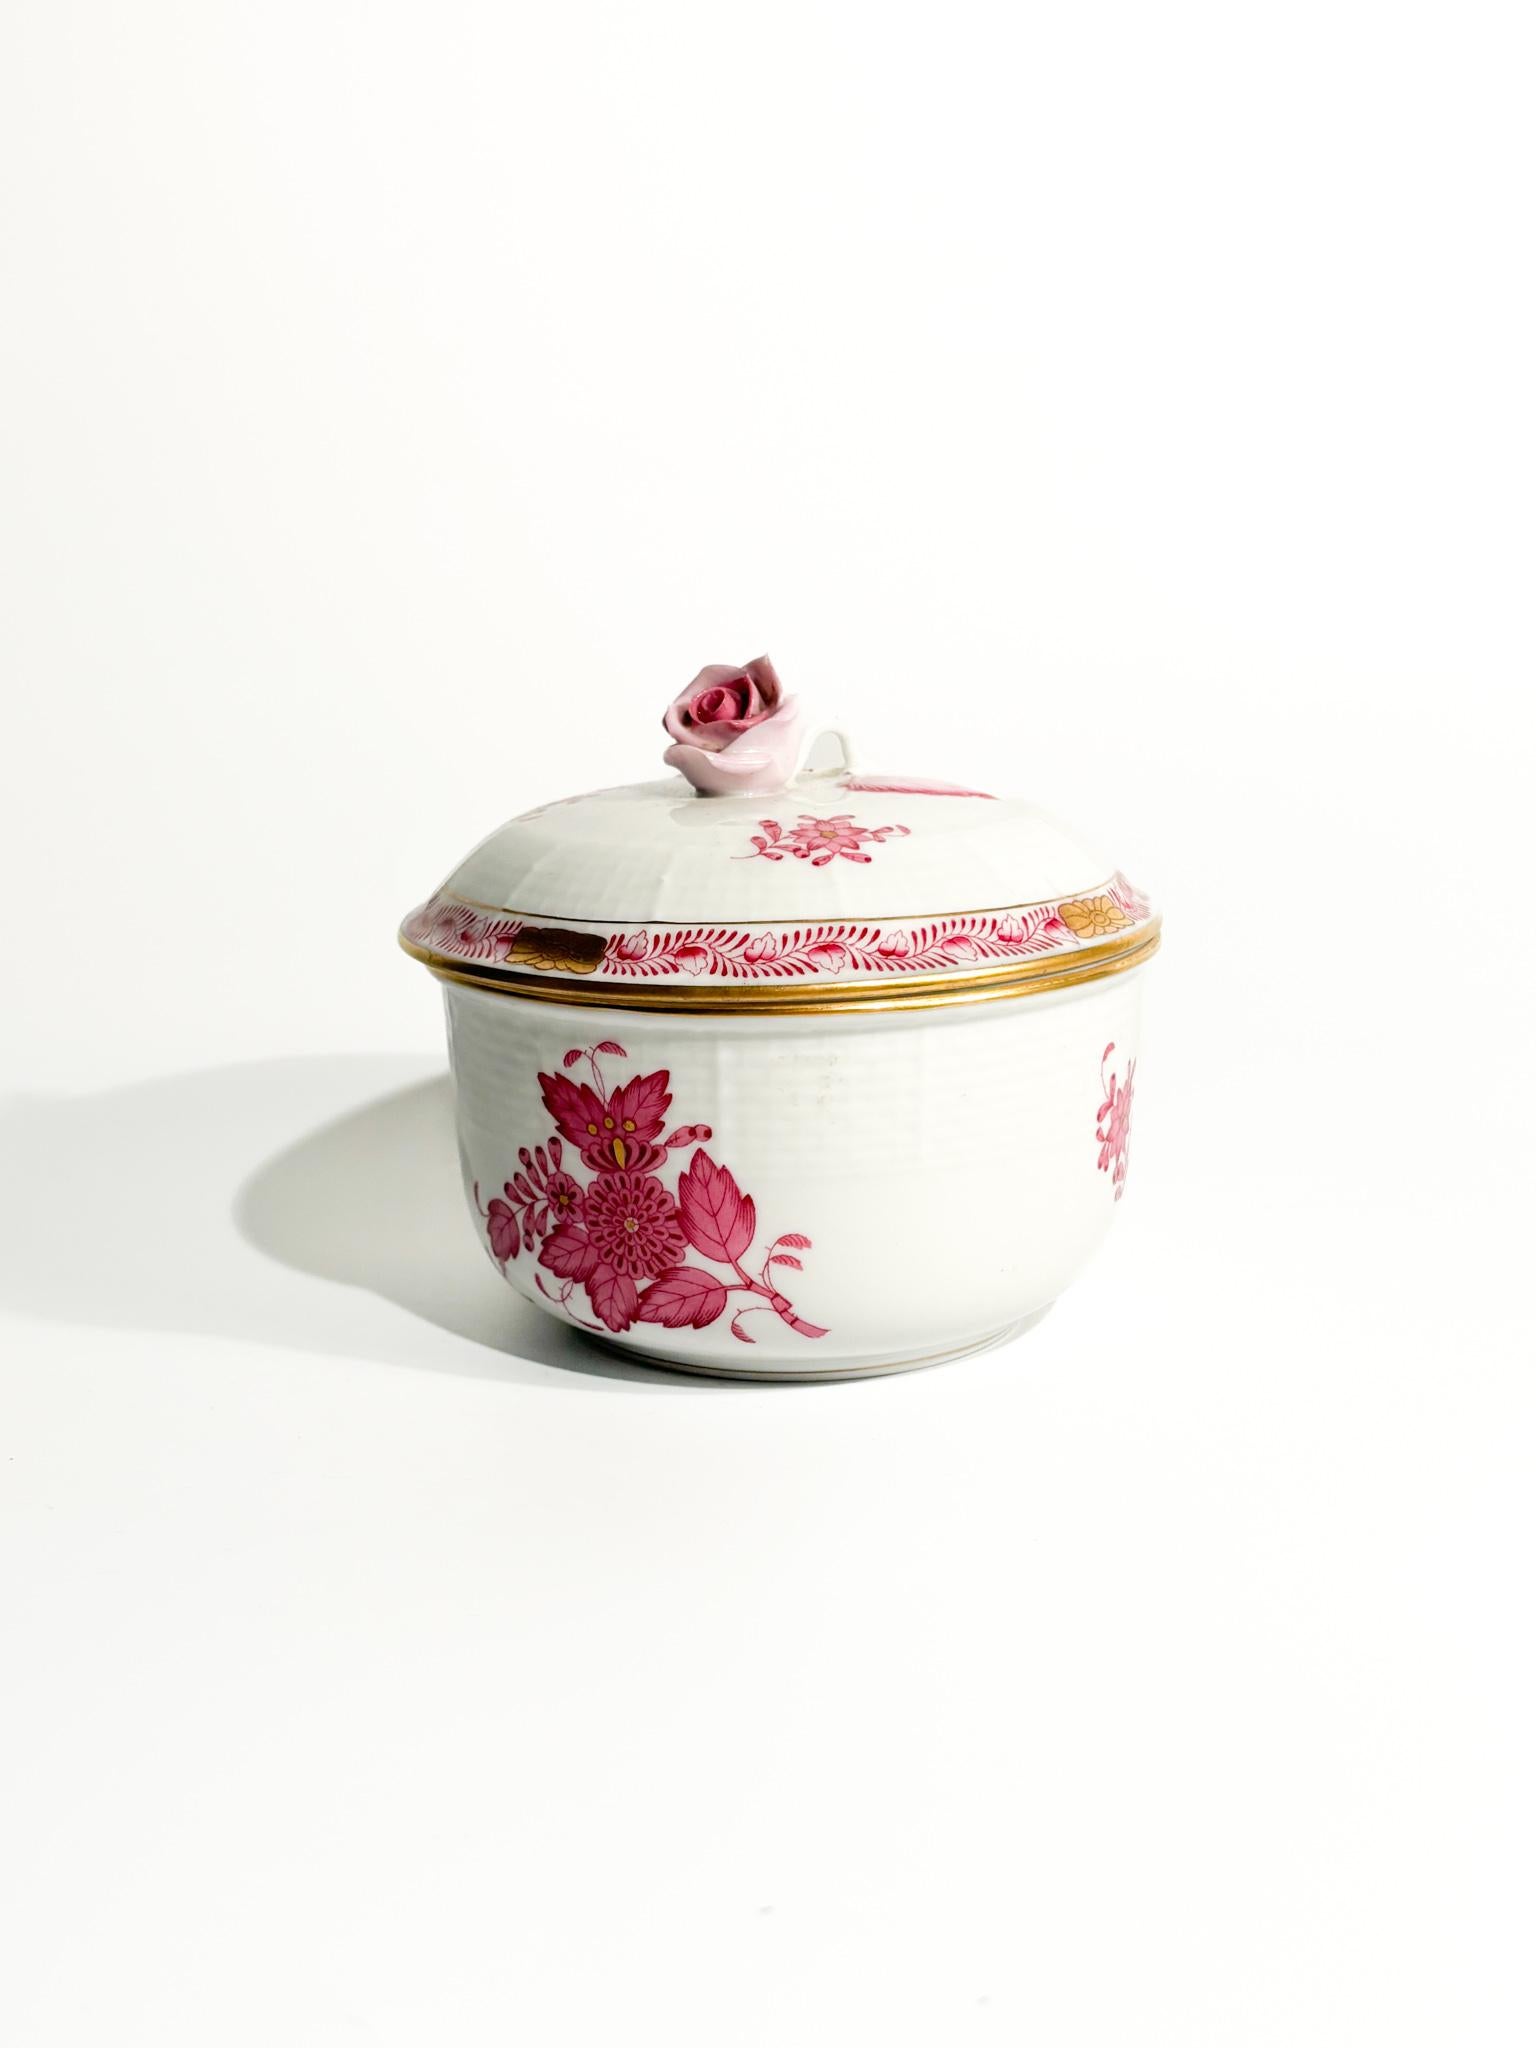 Herend porcelain box, Apponyi Pink collection, made in the 1950s

Ø cm 11 h cm 11

Herend porcelain is among the most prestigious and sought after in the world. Made in Hungary since 1826, Herend is known for its exceptional quality, craftsmanship